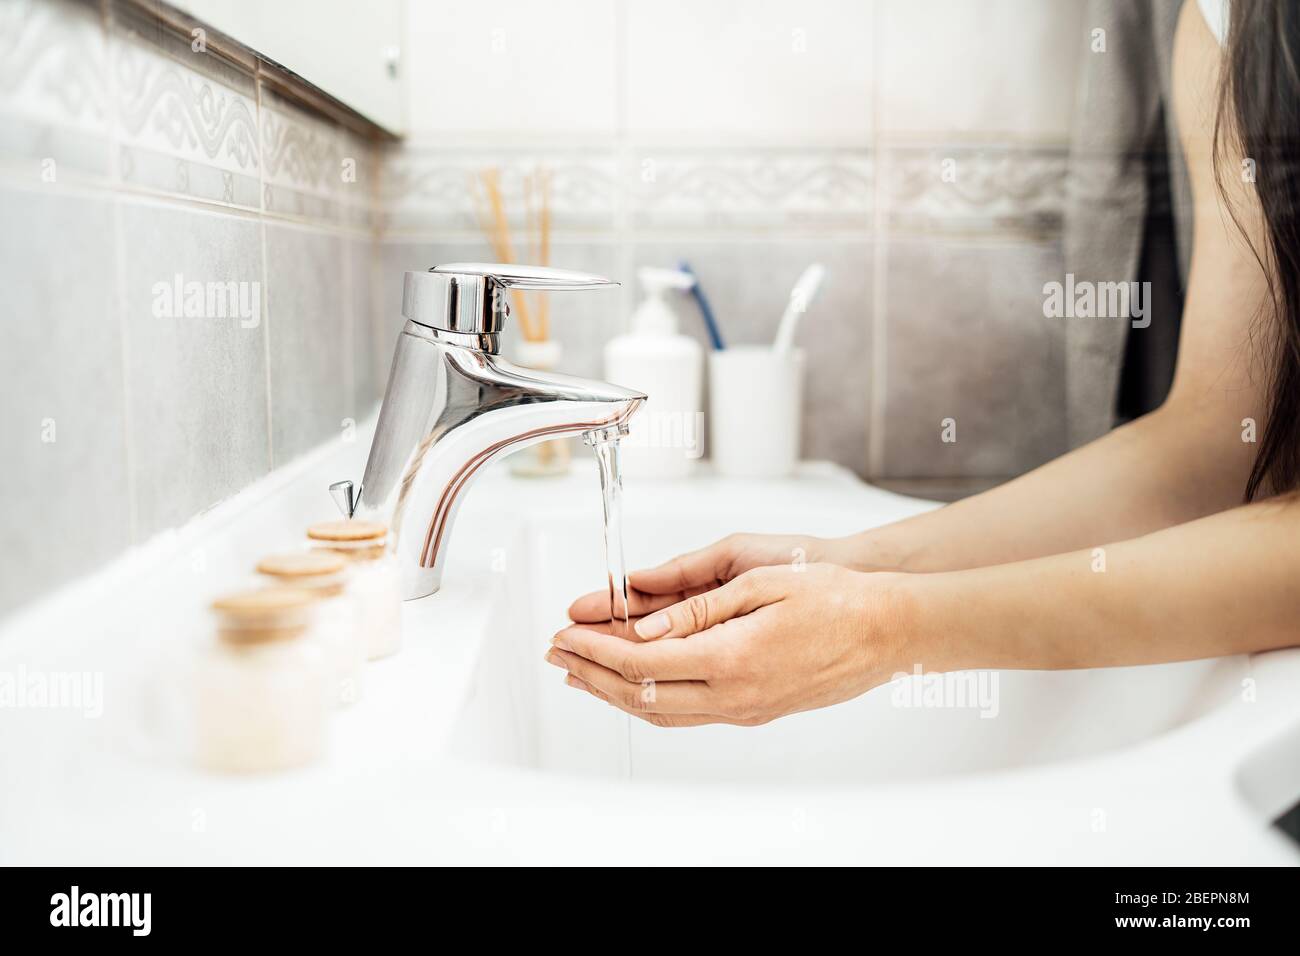 Antiseptic hand washing practice with soap and water in bathroom.Decontamination procedure,personal hygiene routine.Cleaning hands regularly. Stock Photo